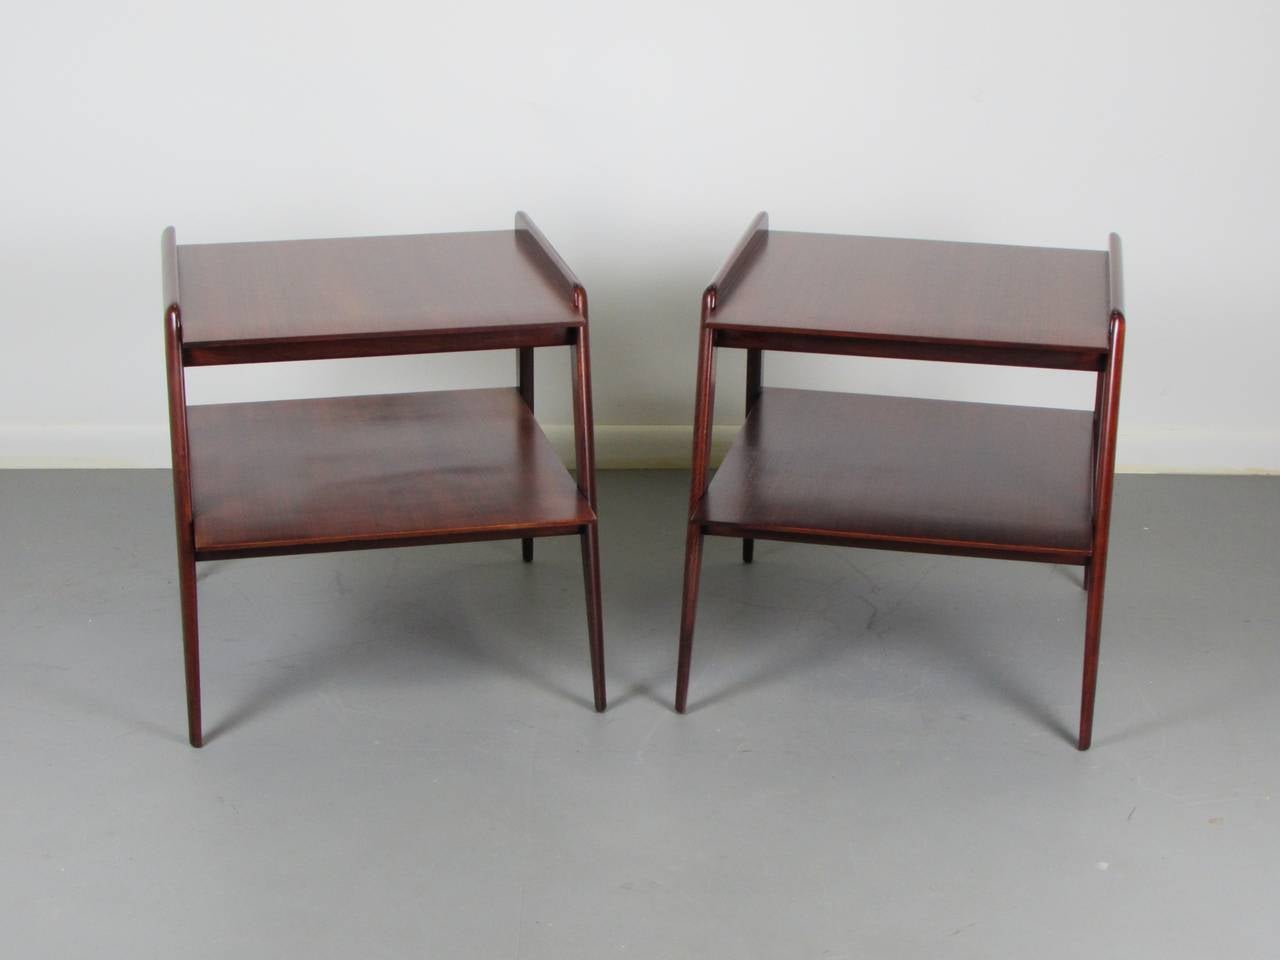 Mid-20th Century Rare and Wicked Pair of End Tables by M. Singer & Sons, Attributed to Gio Ponti